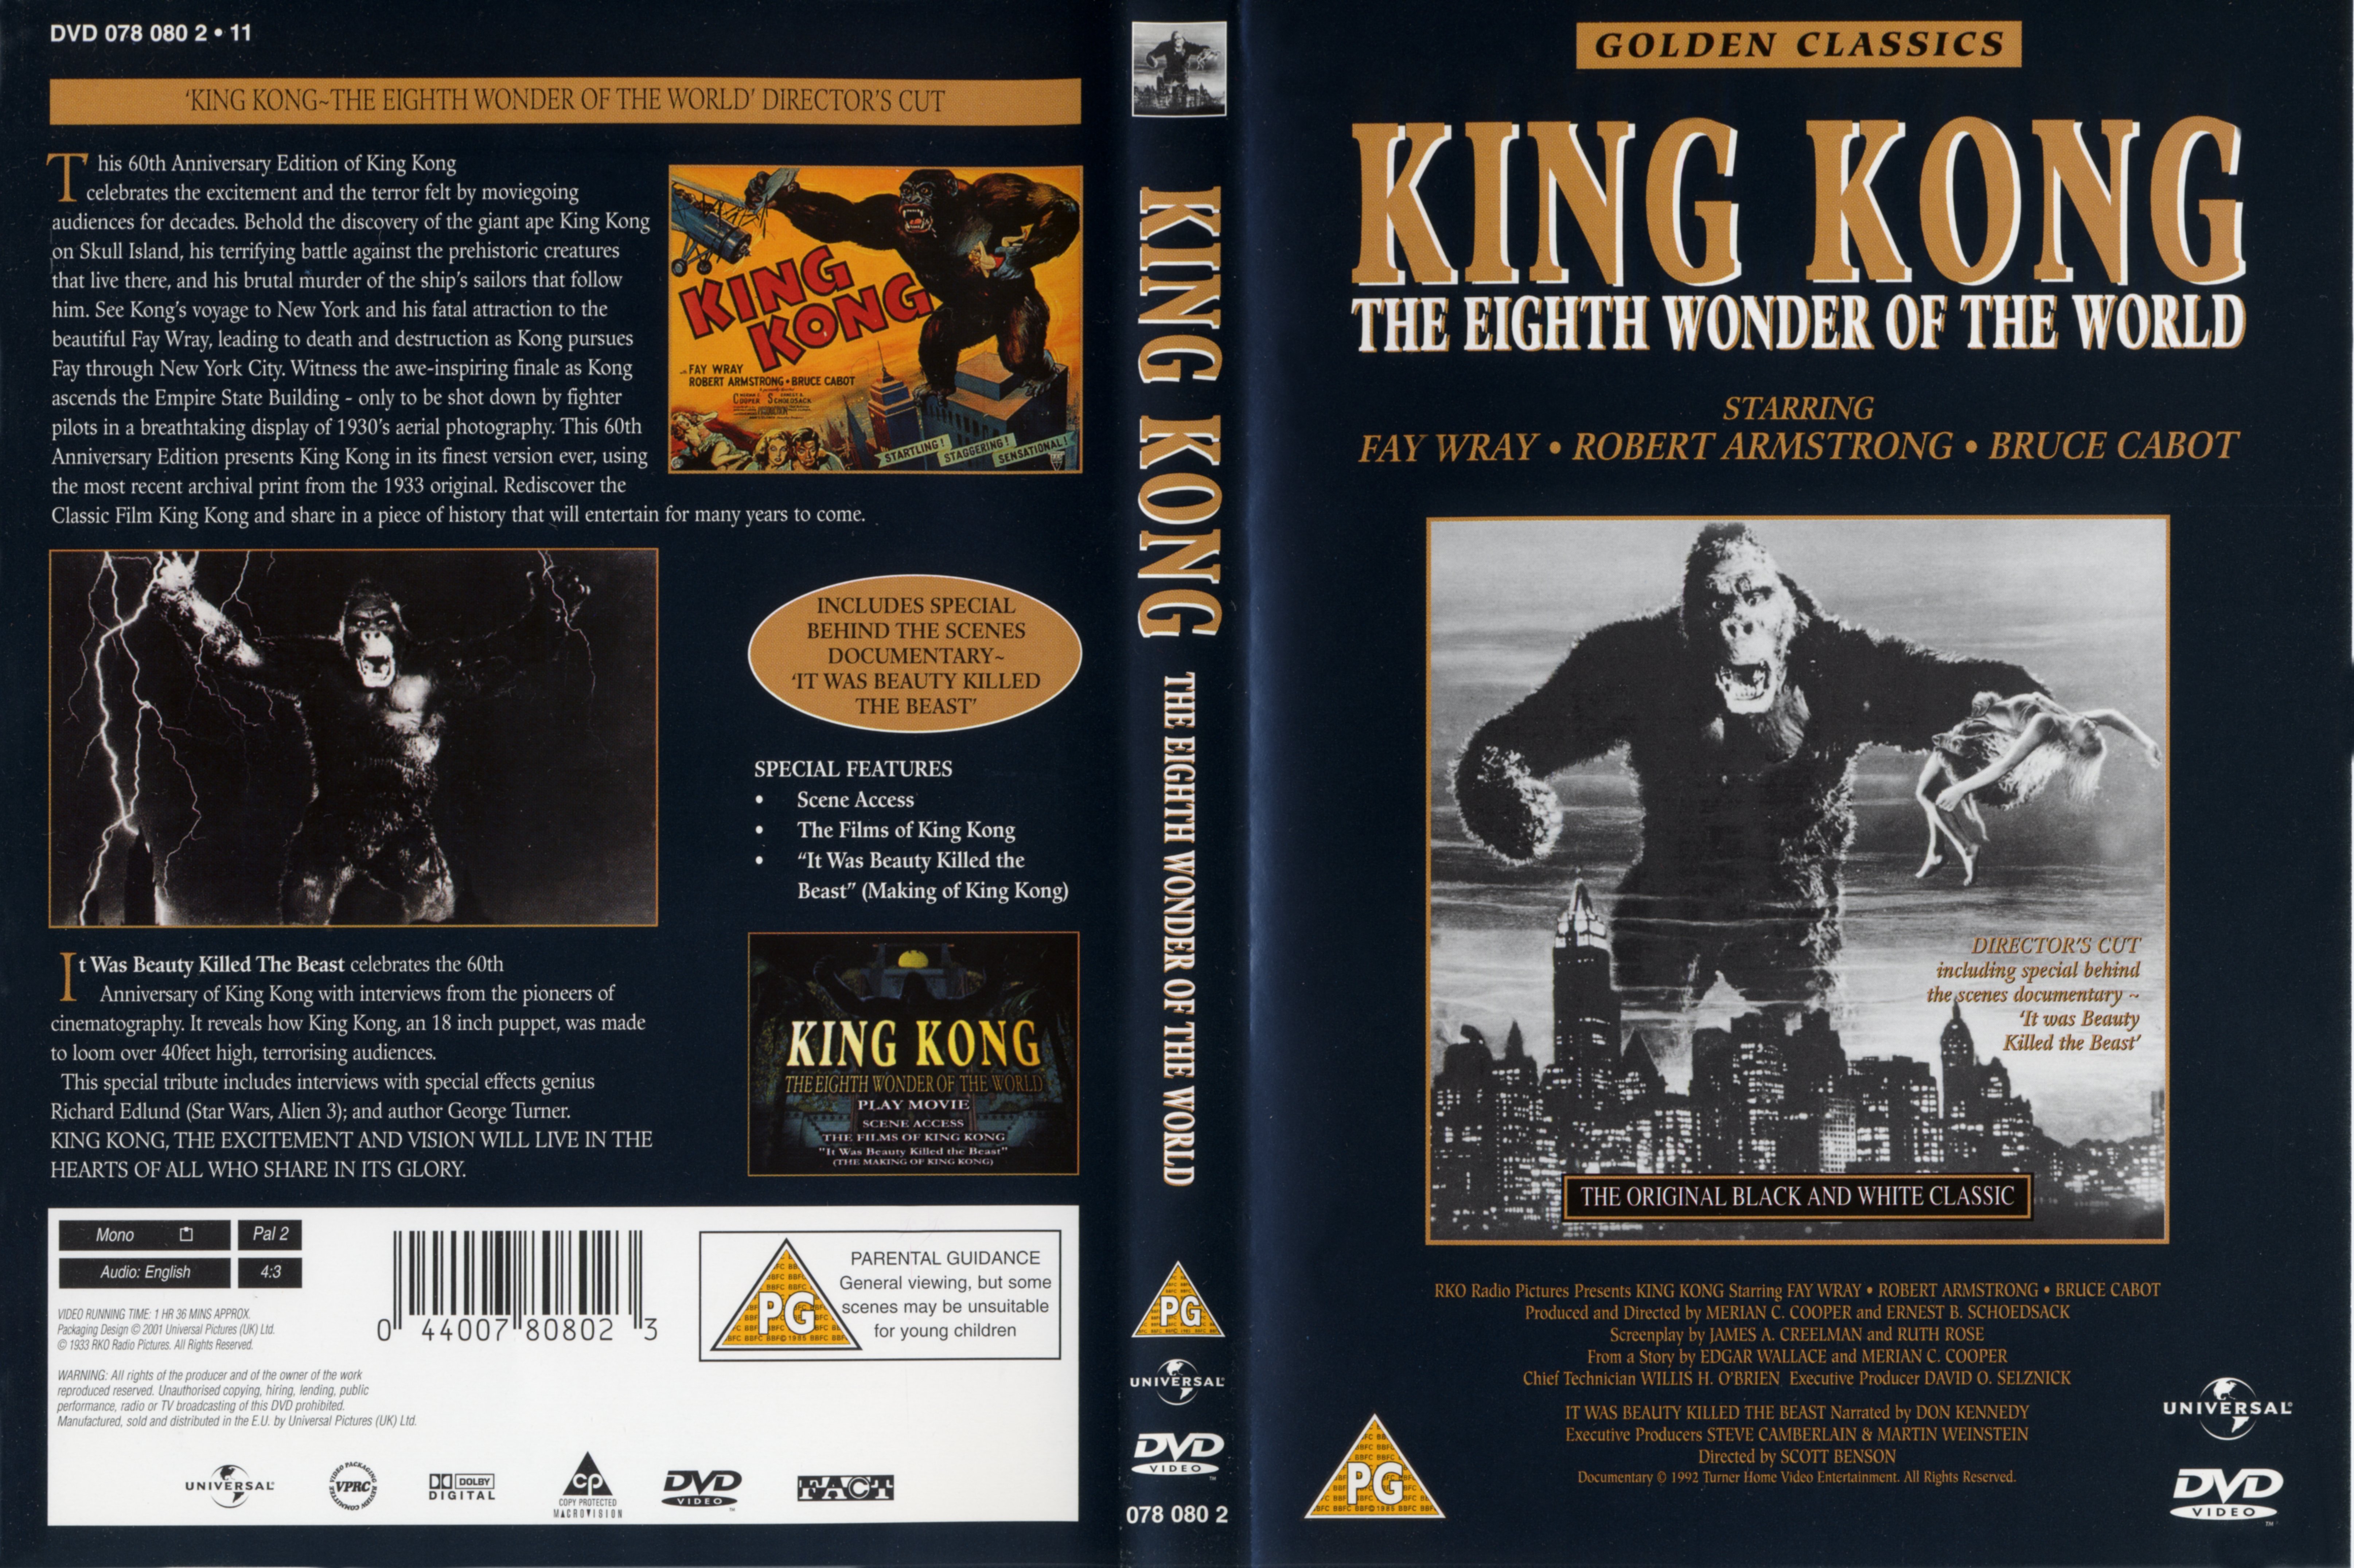 Jaquette DVD King kong 1933 Zone 1